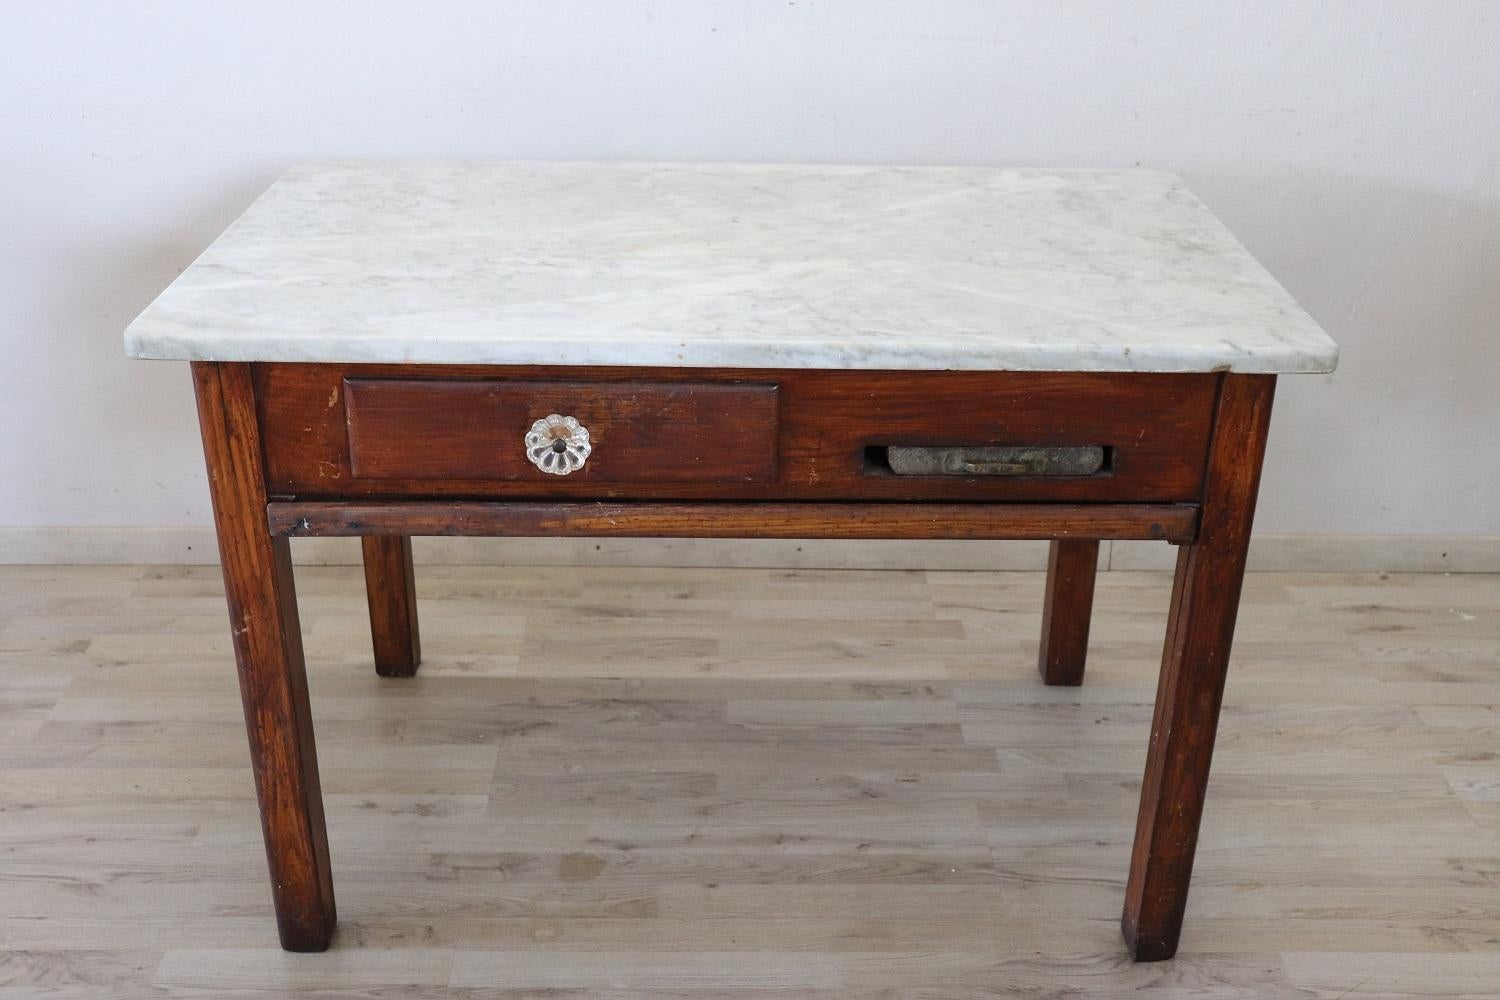 Beautiful very nice Italian oak wood kitchen table, 1930s with marble top. The table is equipped with many accessories necessary for the preparation of pasta. This type of table was used in the early 1900s by Italian women who loved cooking and